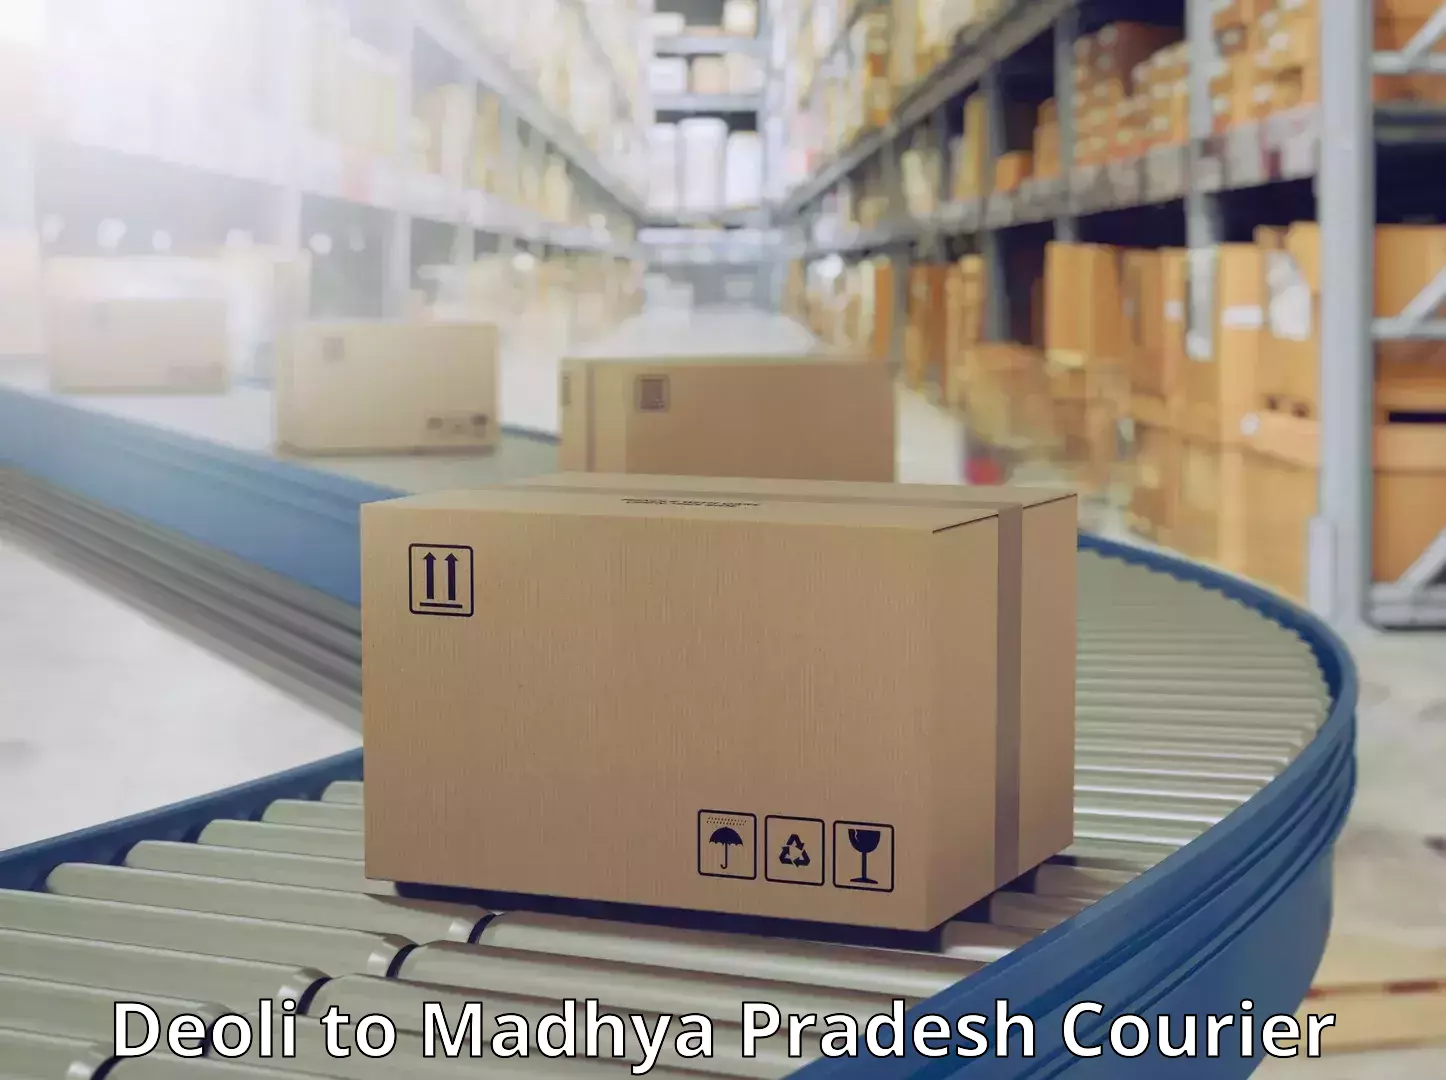 Rapid shipping services in Deoli to Khargone